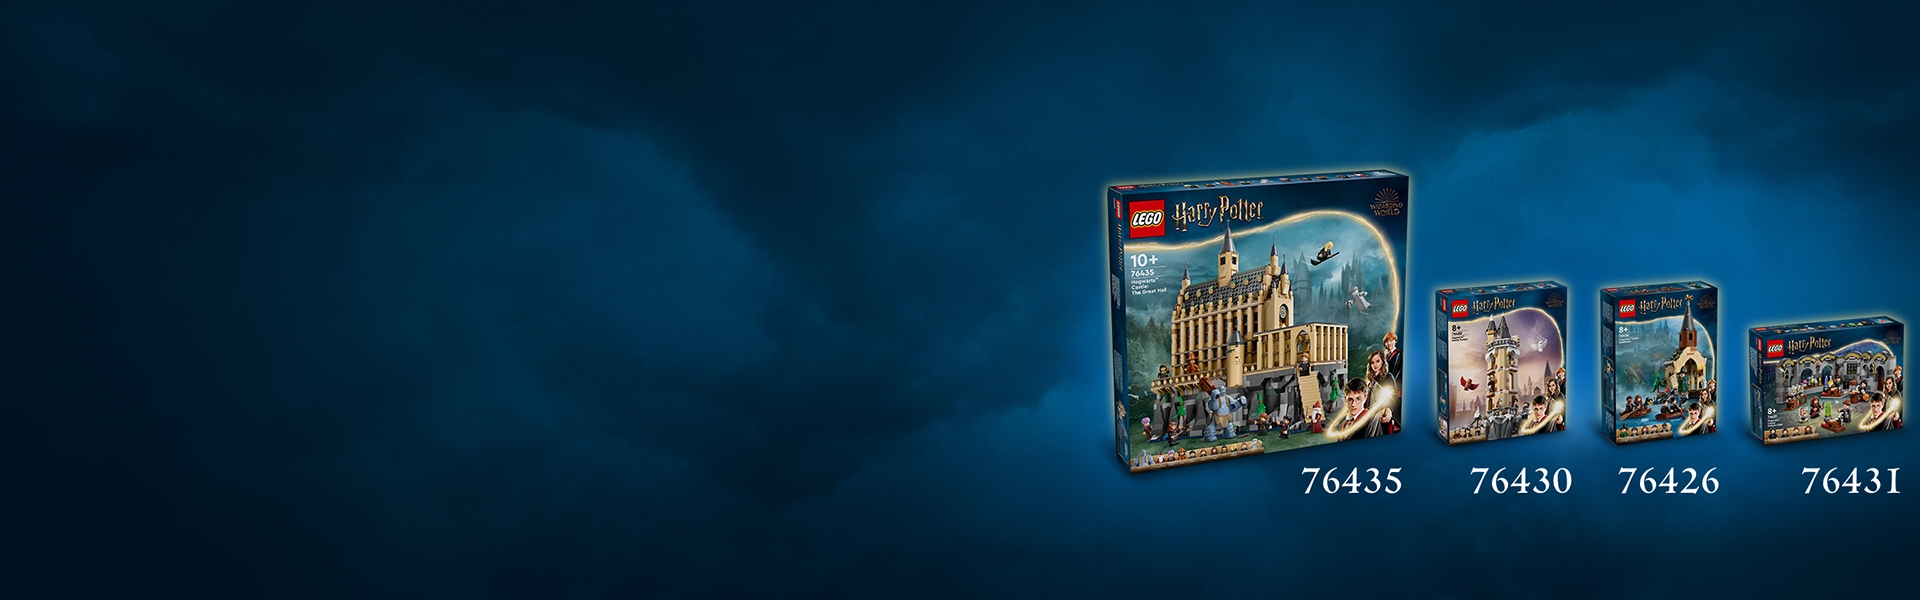 Triwizard Tournament: The Arrival 76440 | Harry Potter™ | Buy 